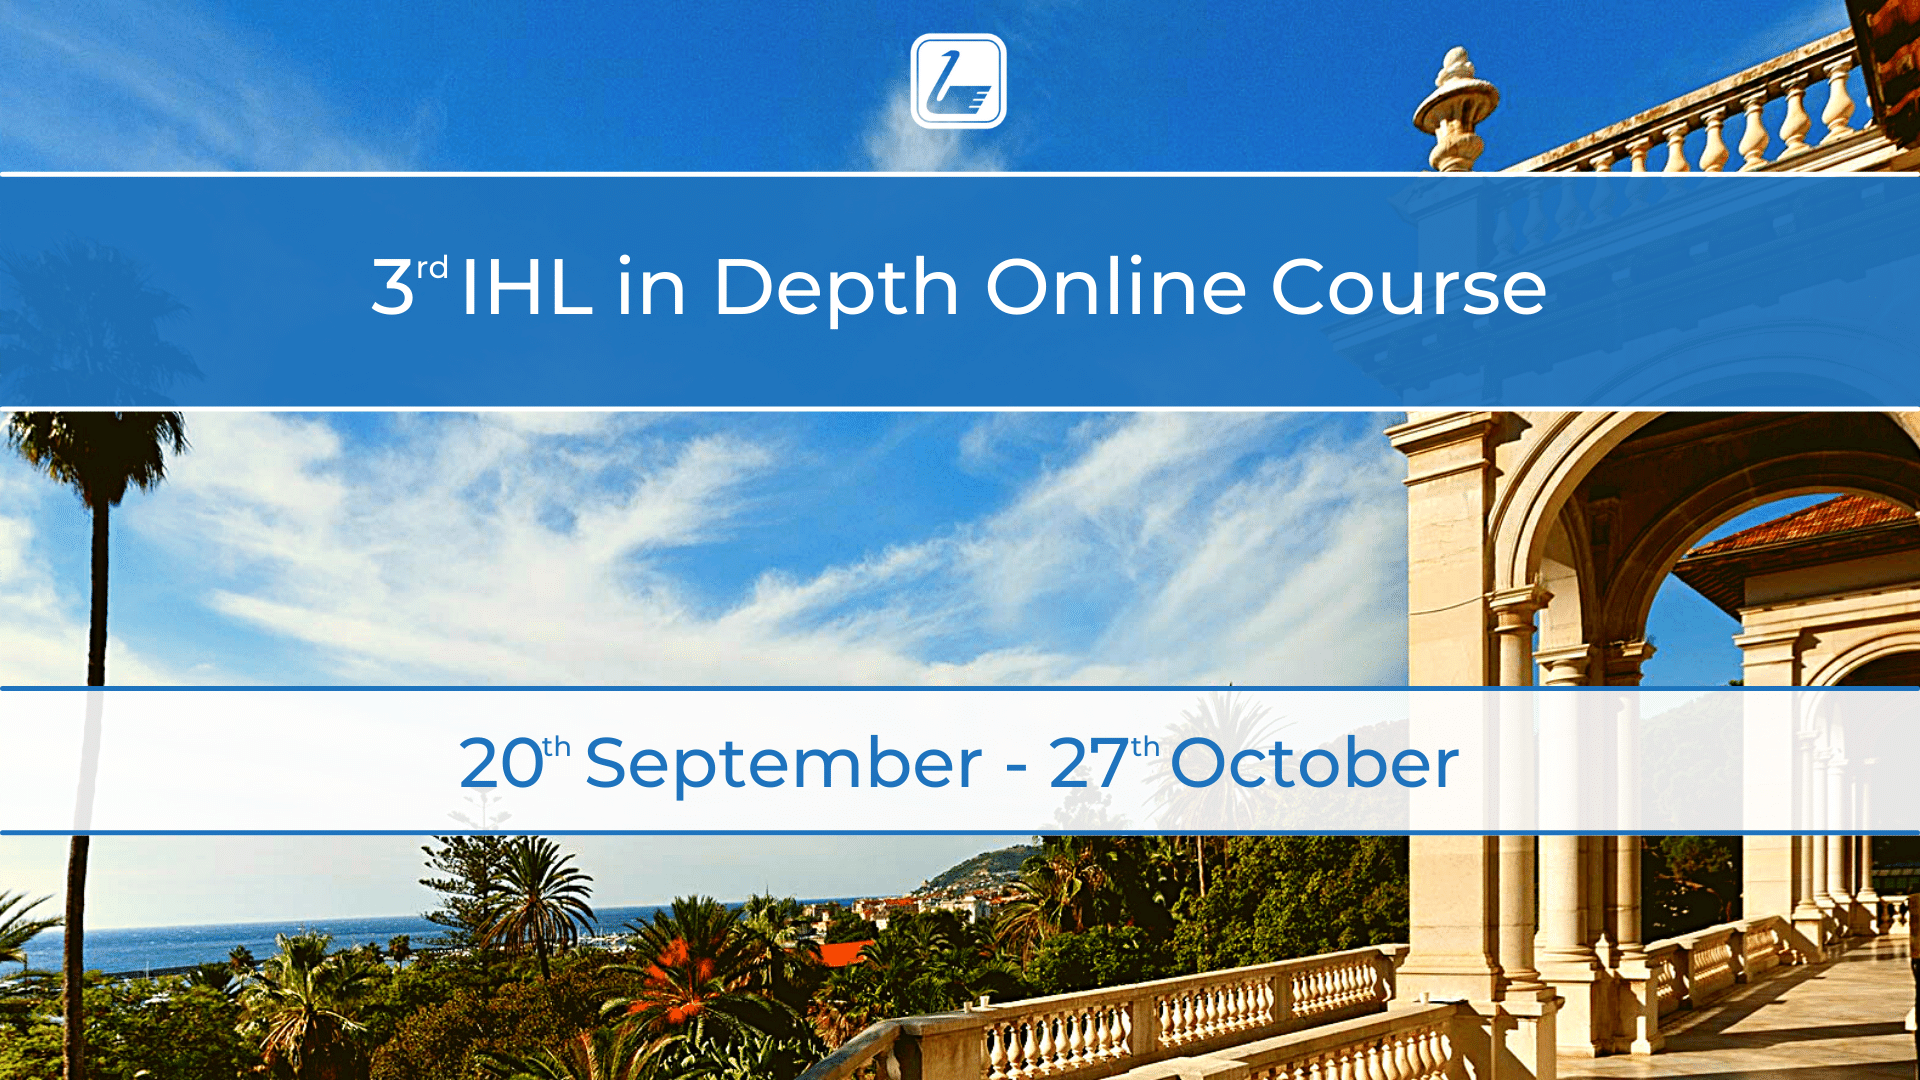 3<sup>rd</sup> IHL in Depth Online Course – Registration is open!